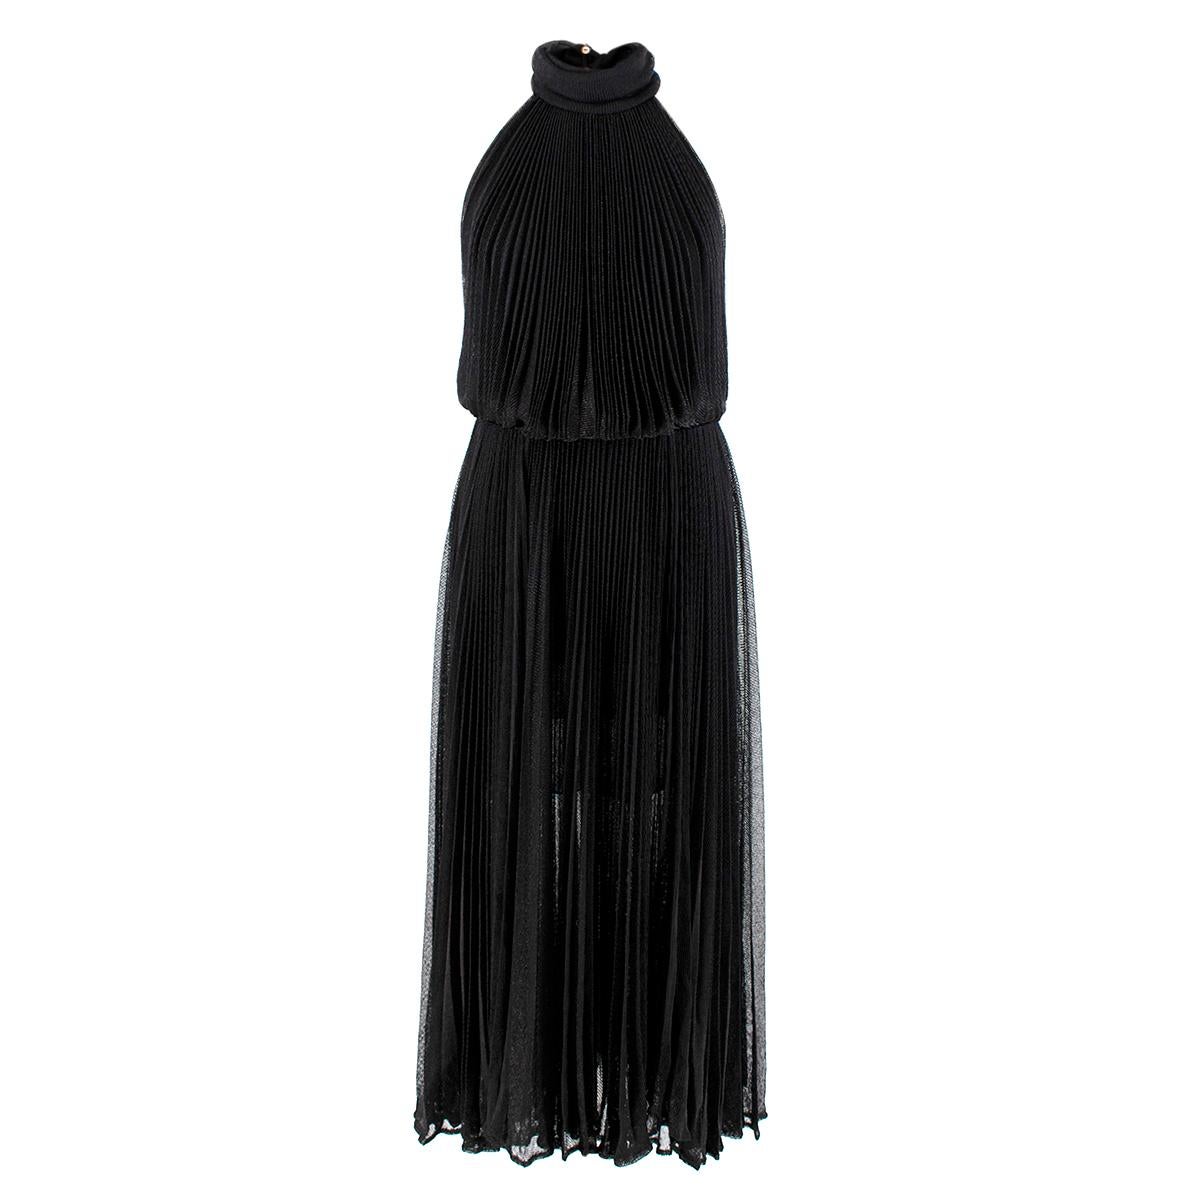 Maria Lucia Hohan Black Lurex Knit Pleated Dress - US Size 4 For Sale